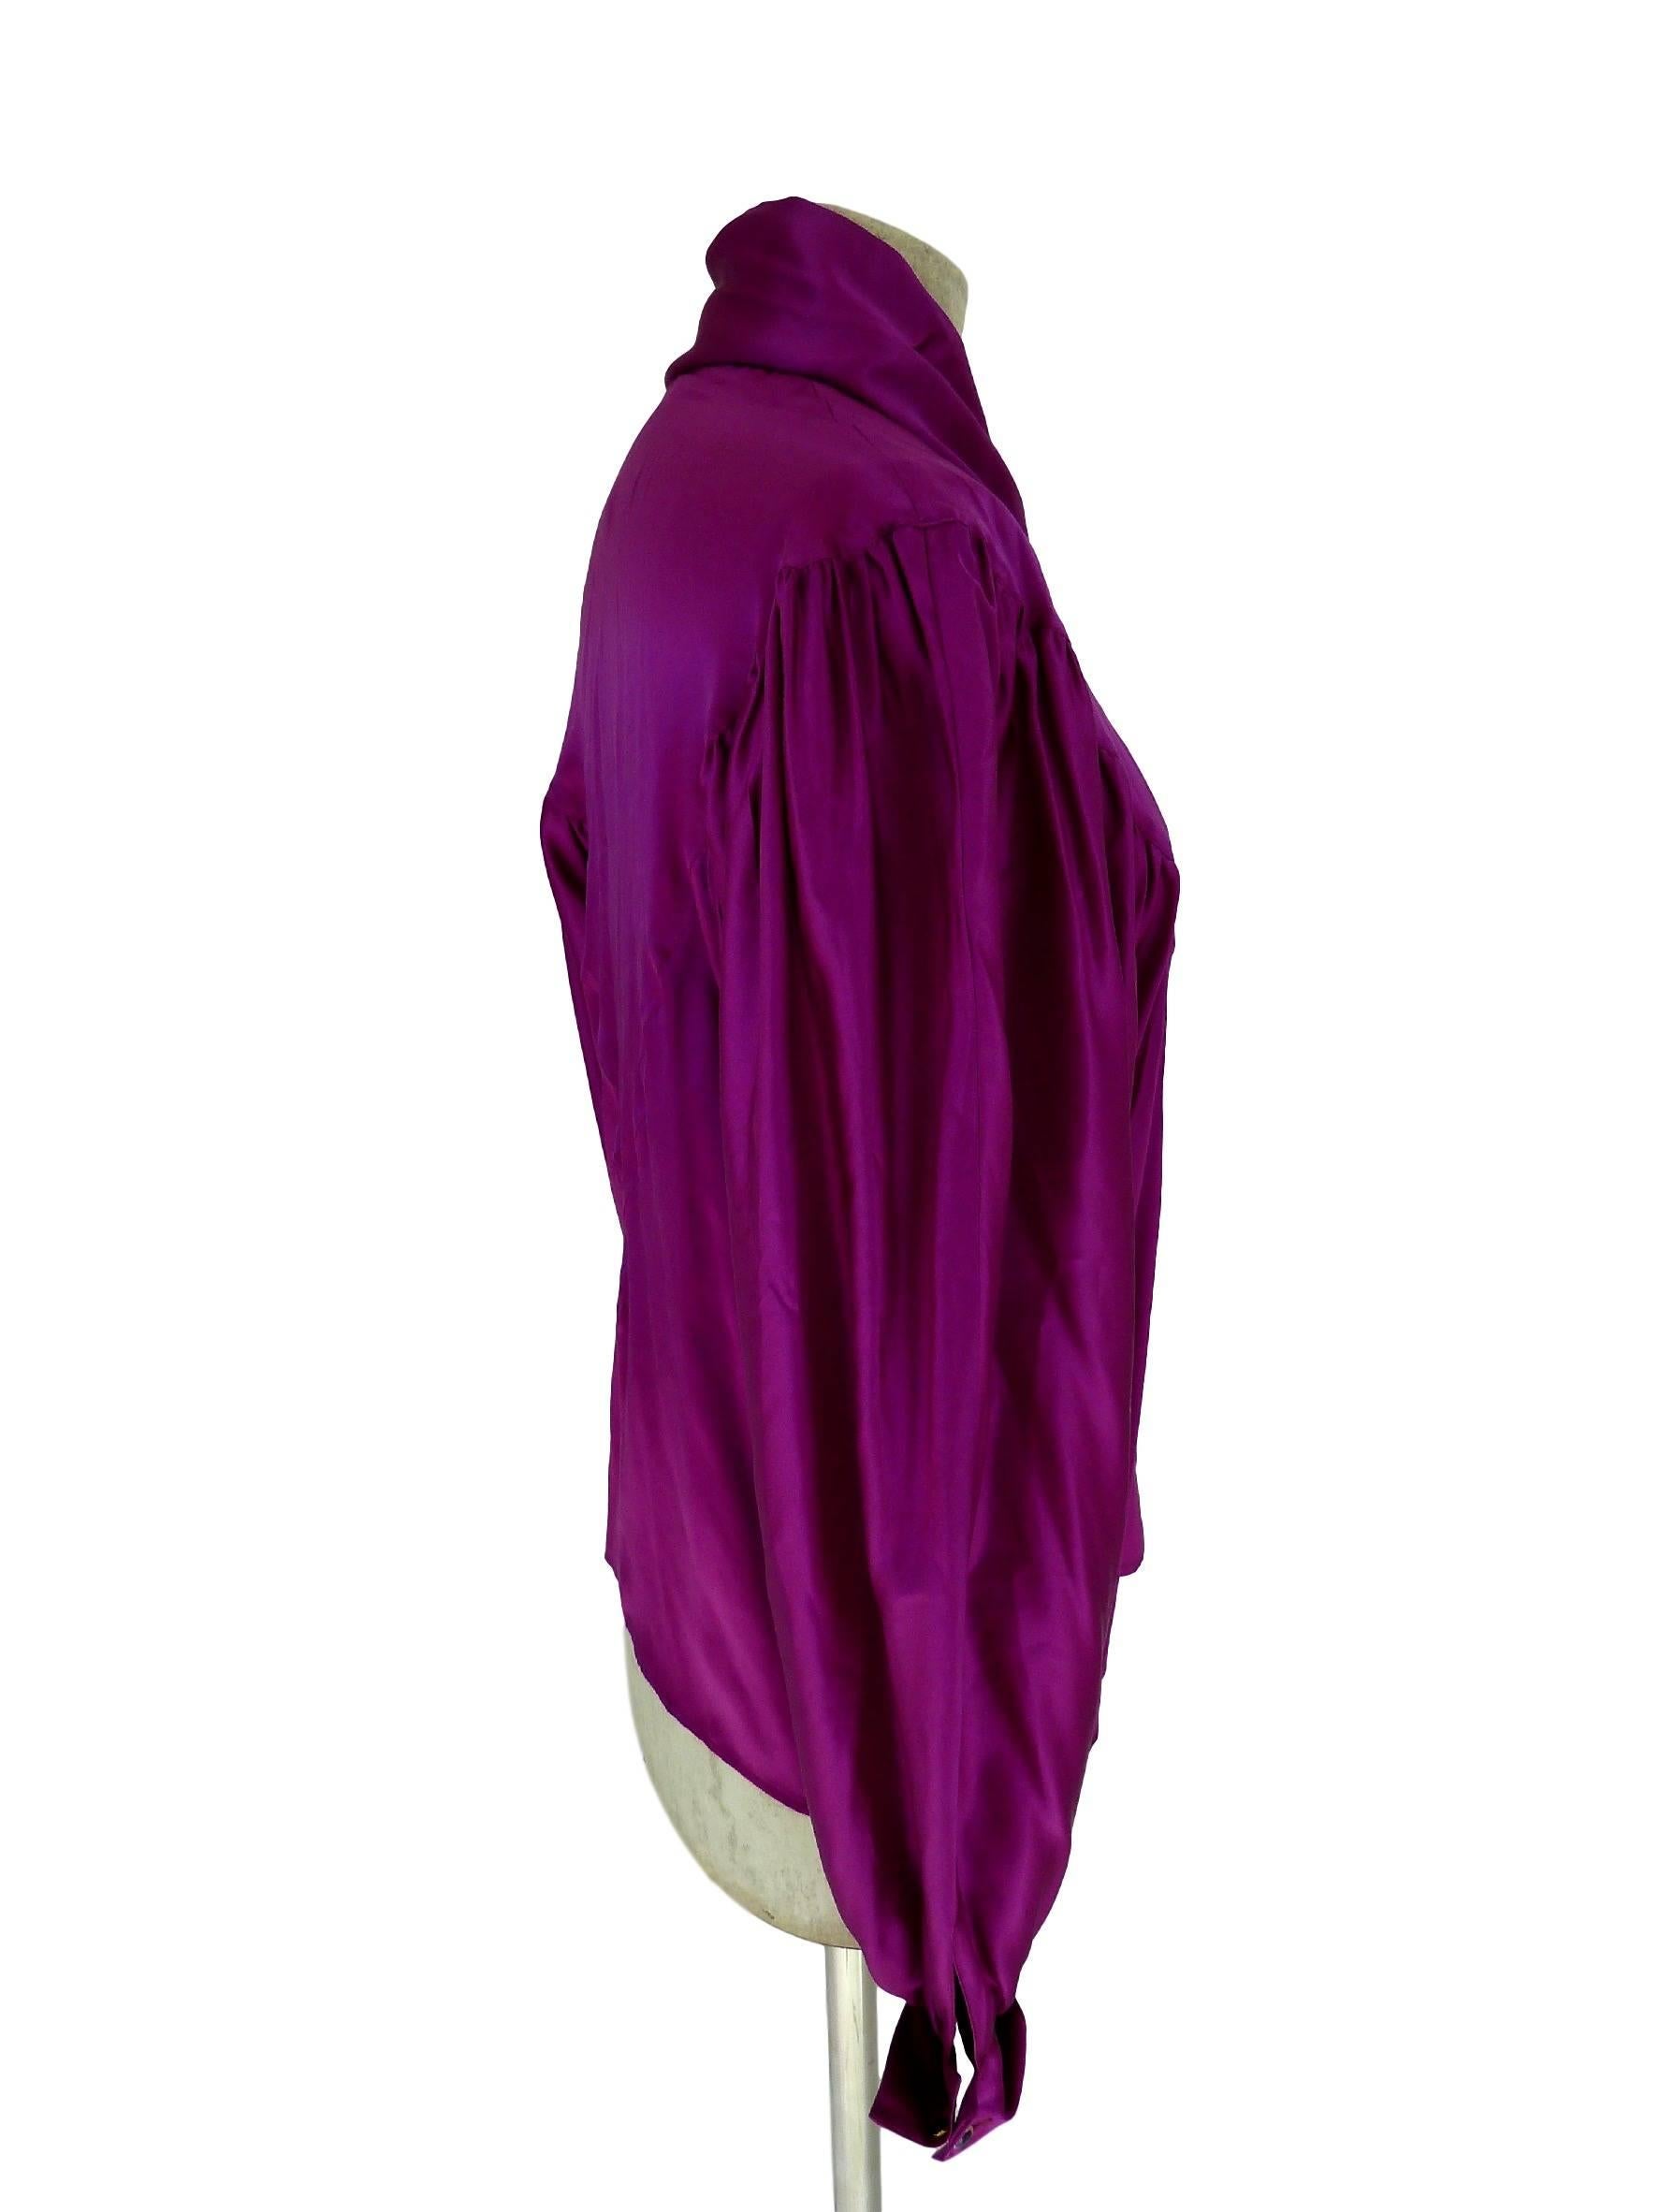 Thierry Mugler vintage 1990s blouse silk women's purple 42 shawl collar balloon In Excellent Condition For Sale In Brindisi, IT